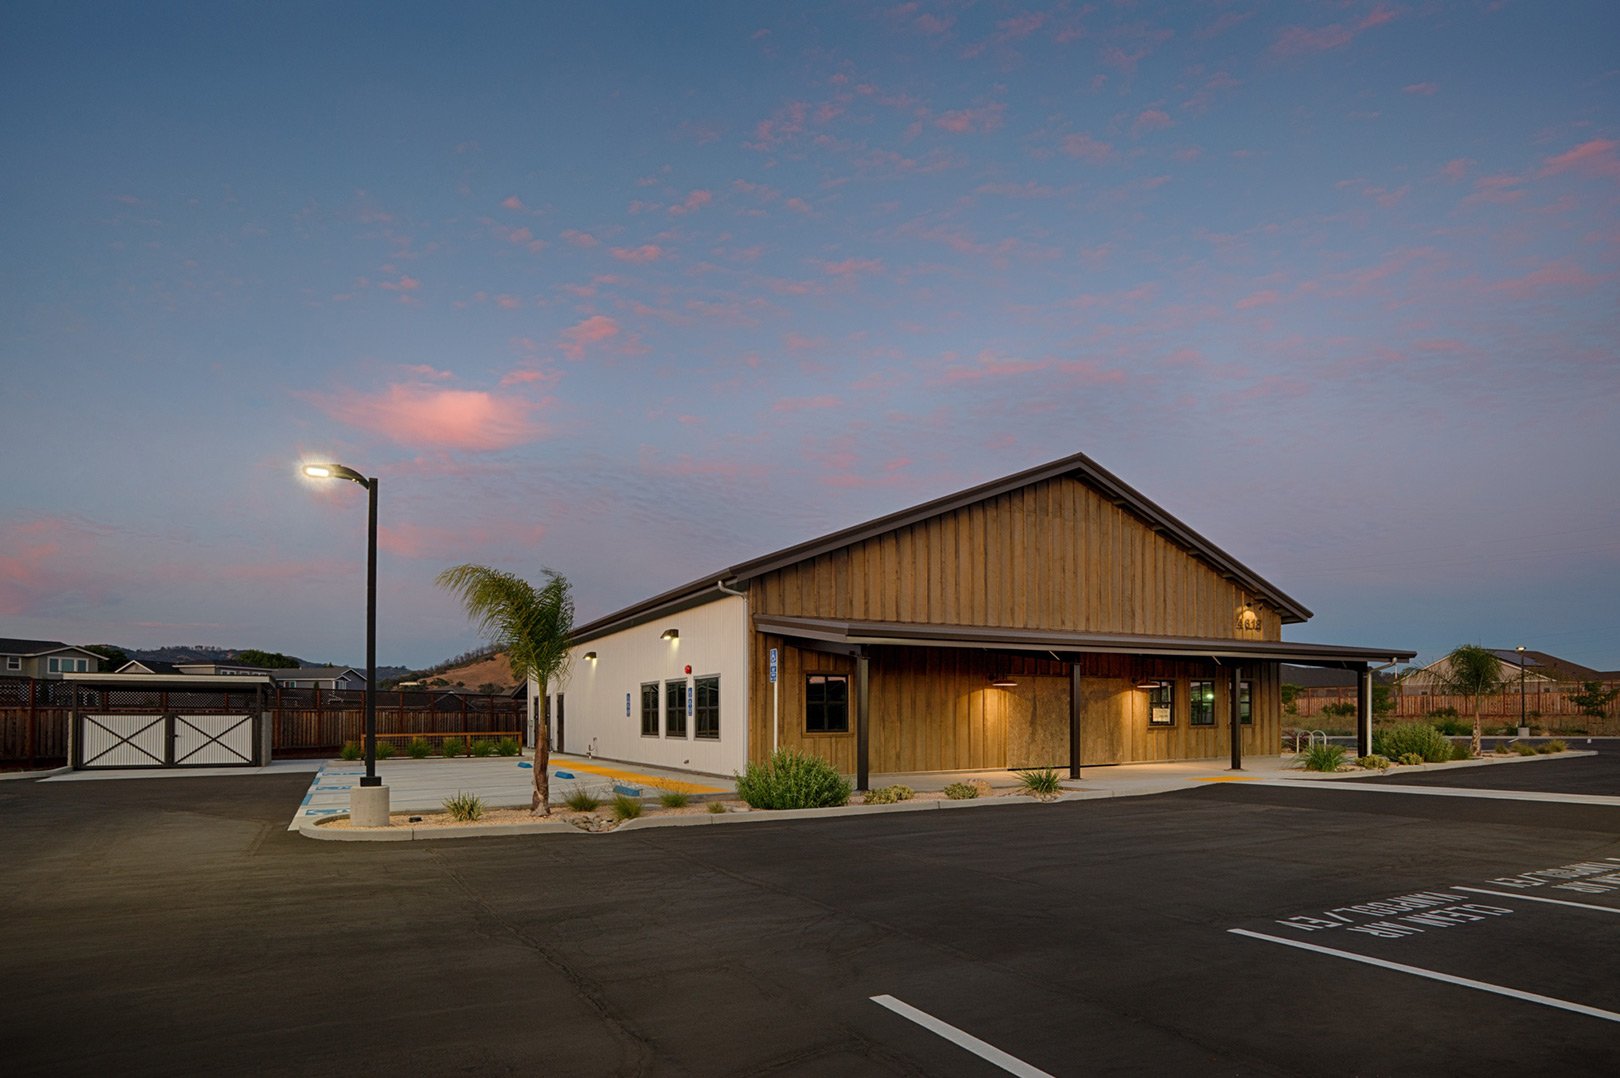 Venturi Building renovation and remodel completed by FDC in Sonoma County